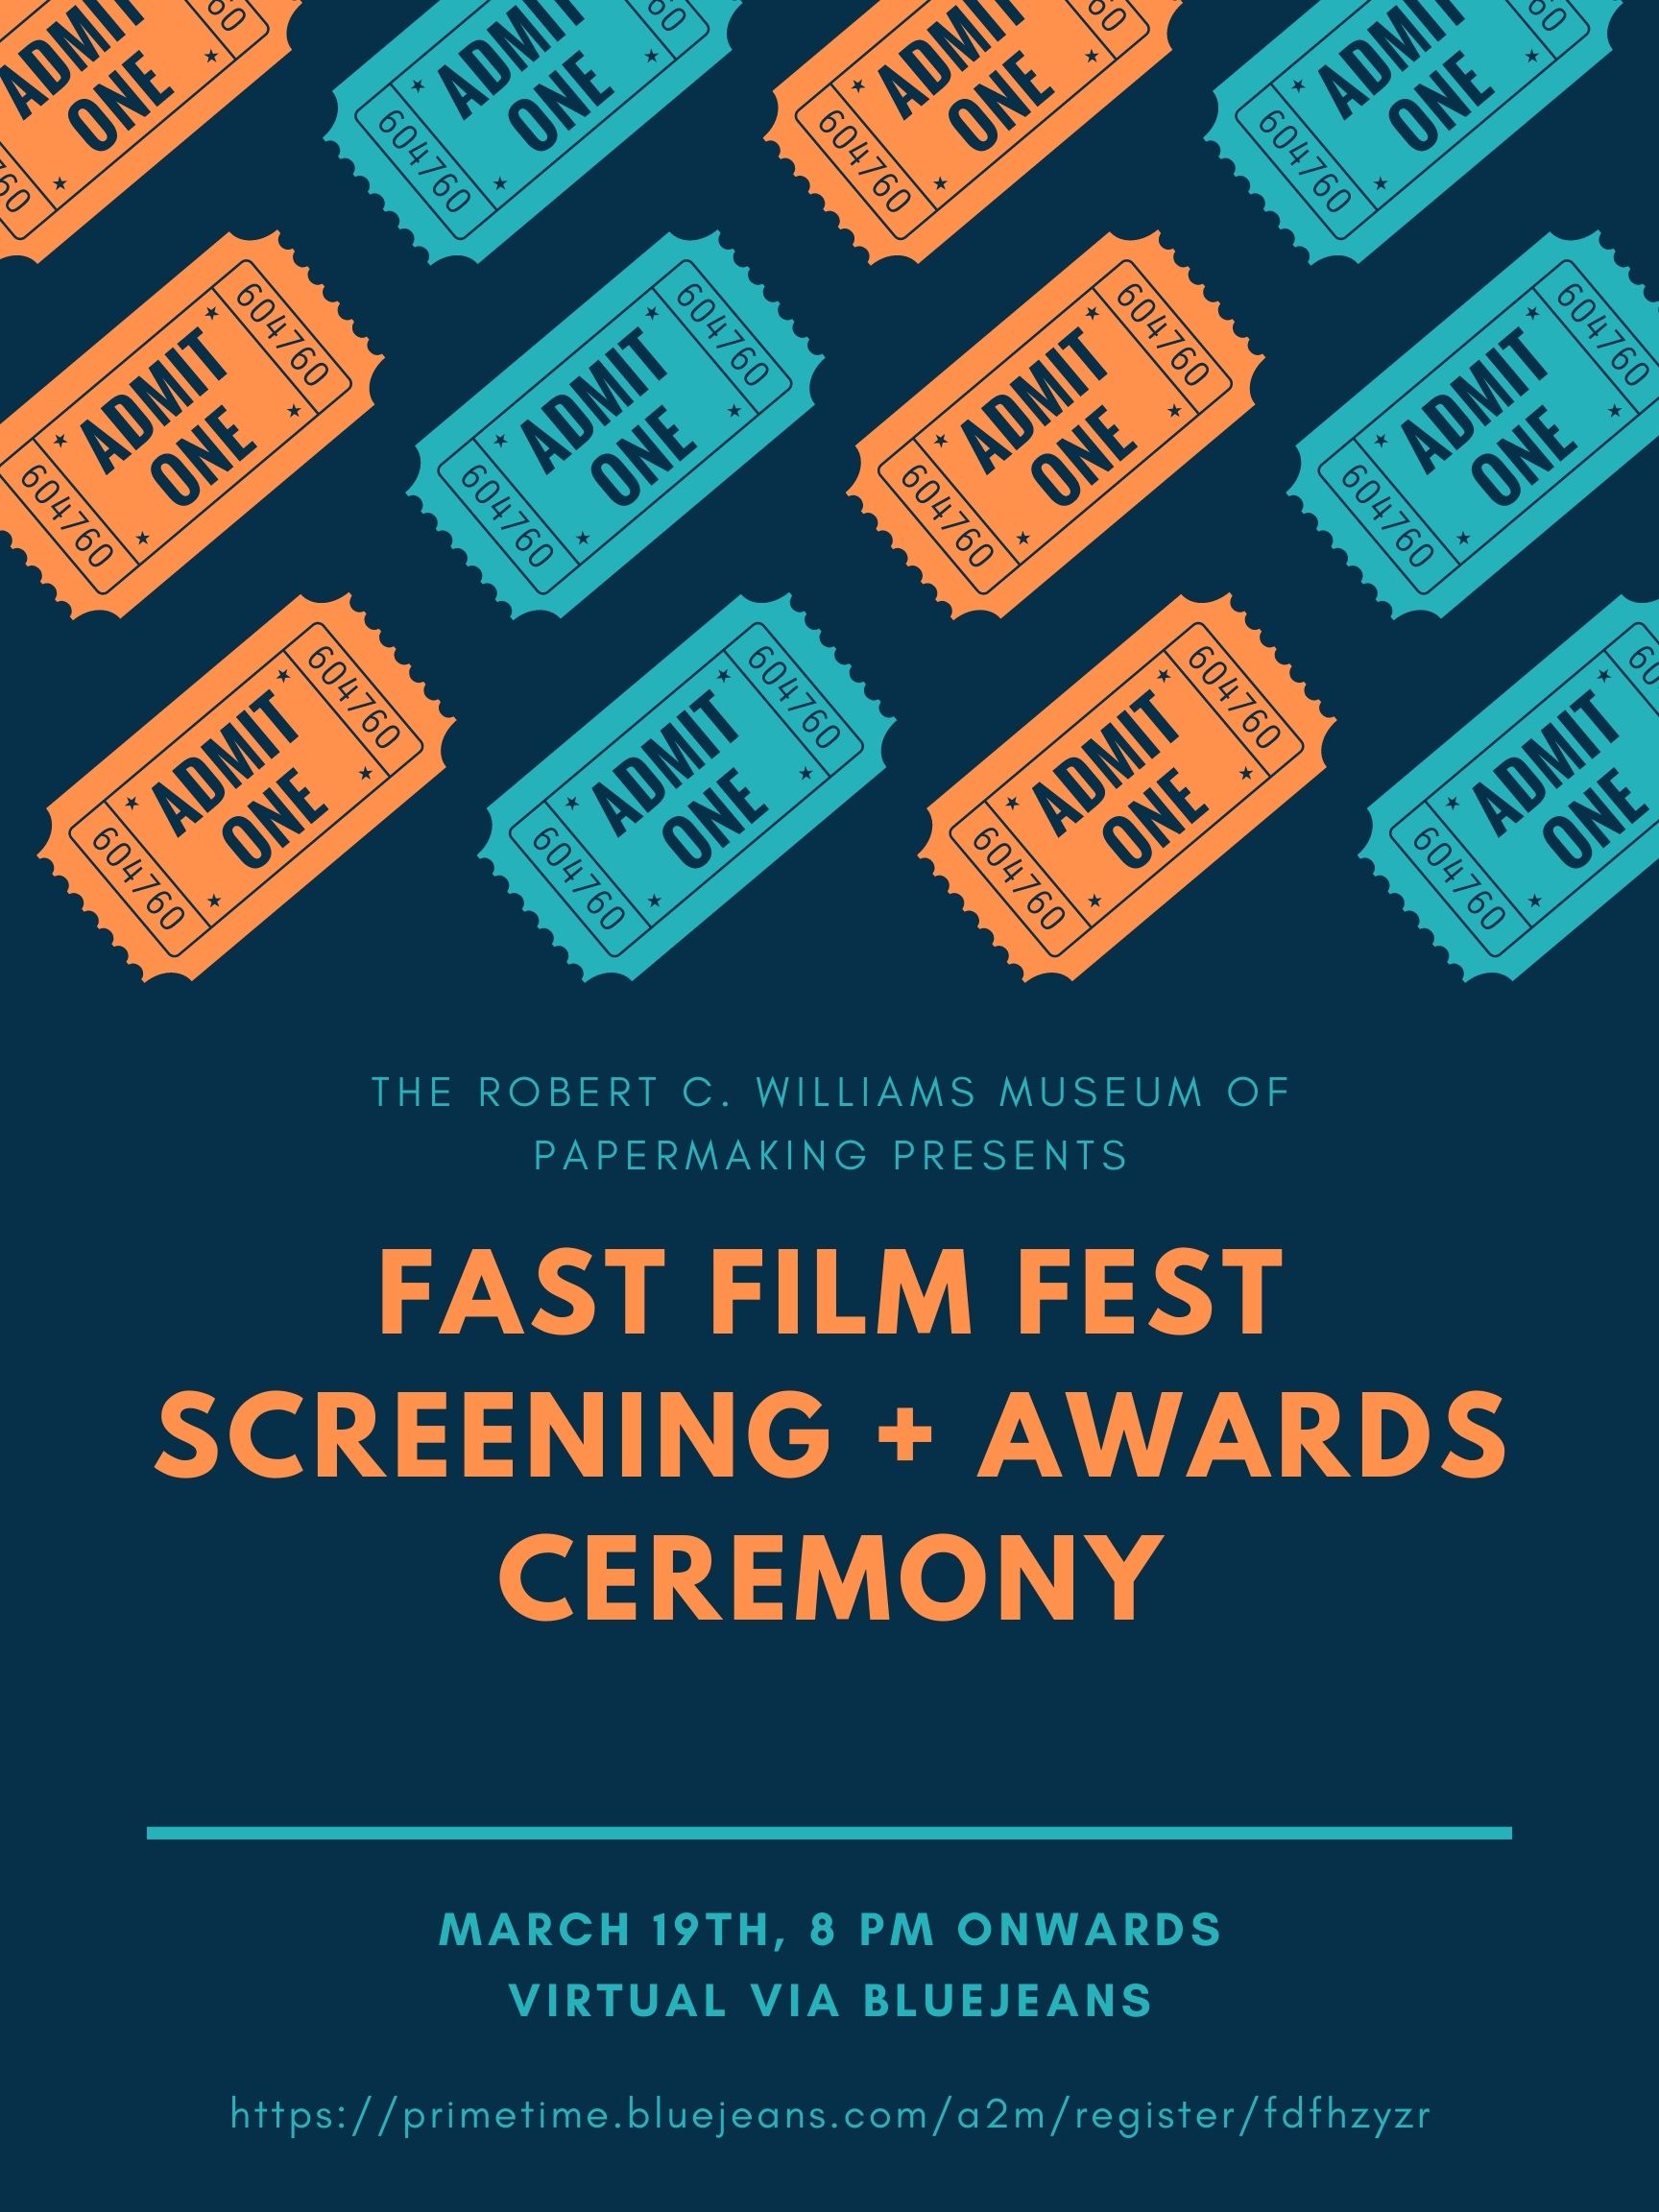 Fast Film Fest 2021 Screening Poster shows multiple ticket stubs arranged in rows at an angle. The stubs alternate between the color turquois and orange on a navy blue background with the text outlining the screening date information and partners below.